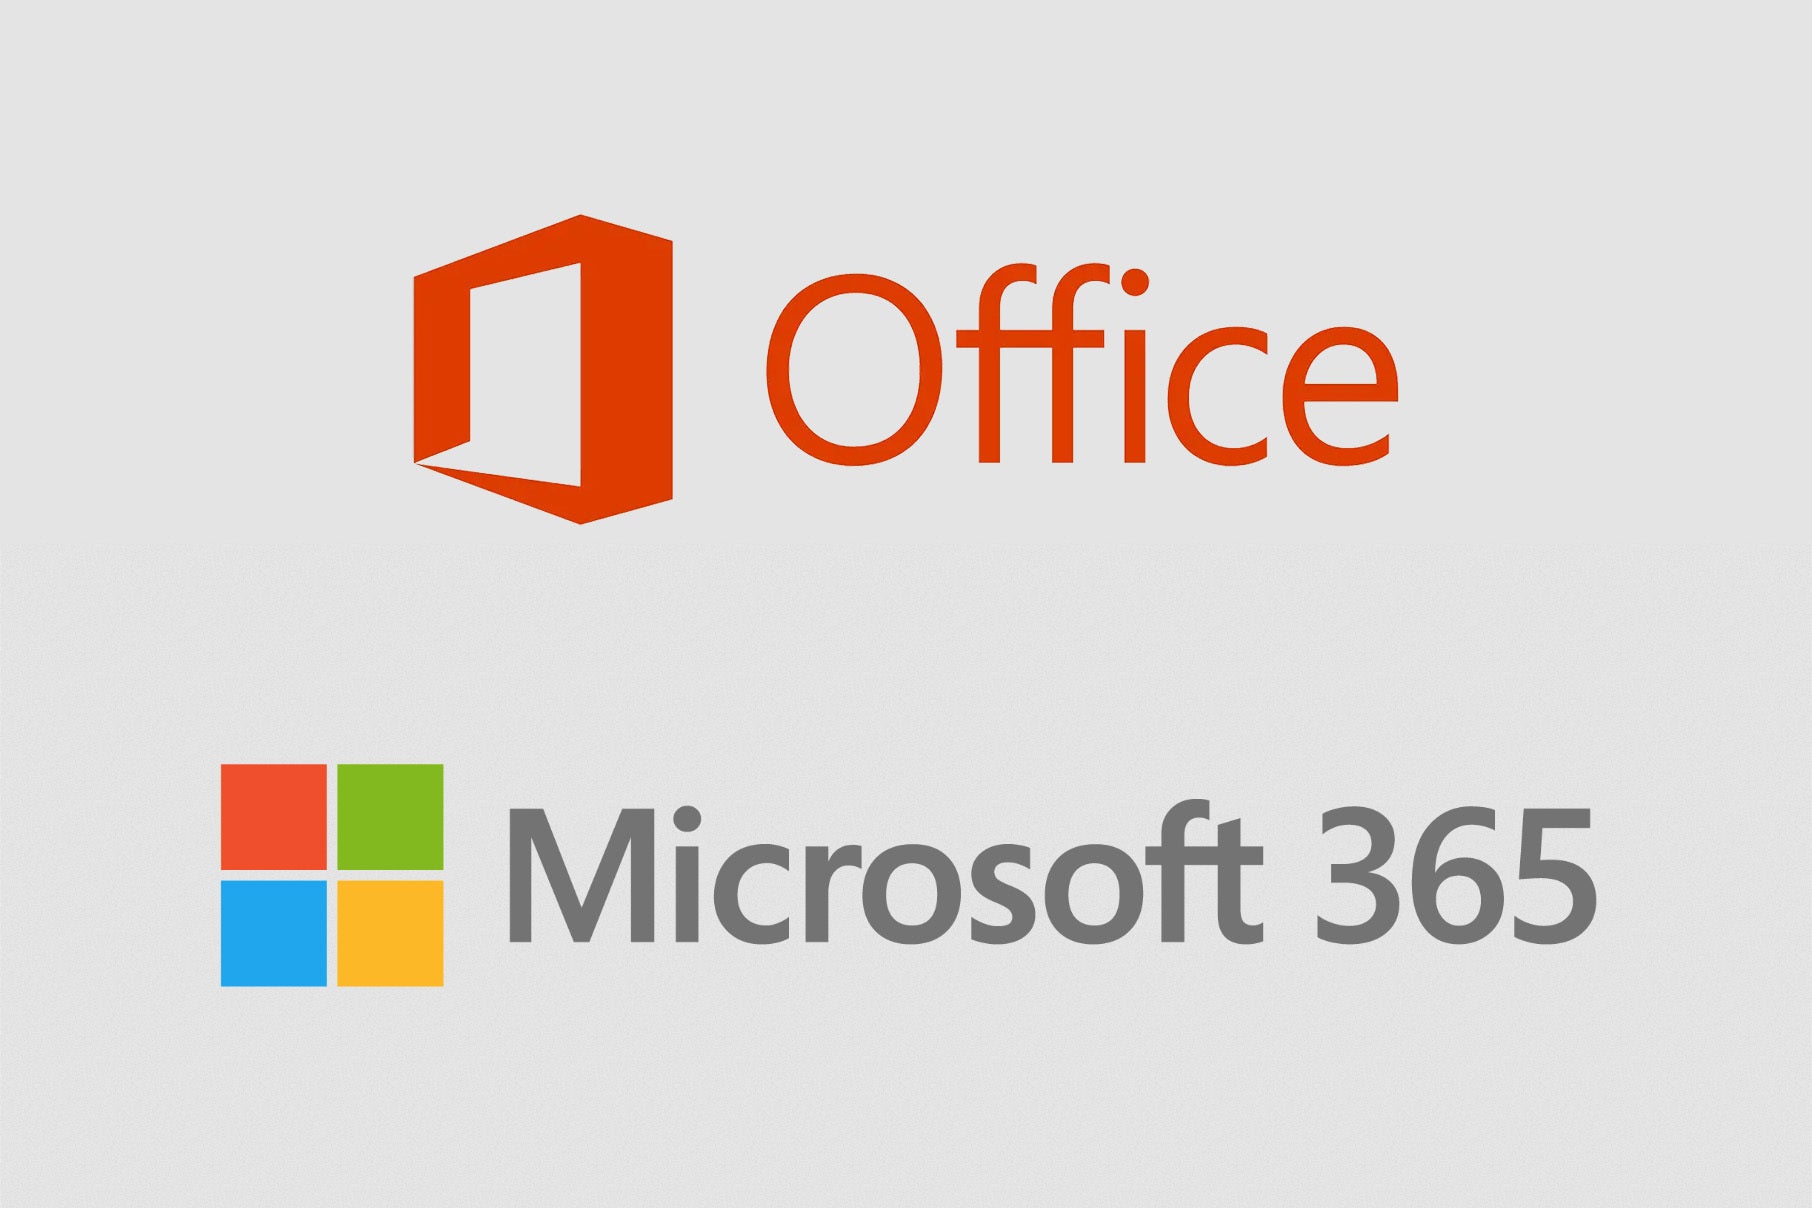 Buyer's guide: How to choose Microsoft 365 vs. Office 2021 – Computerworld